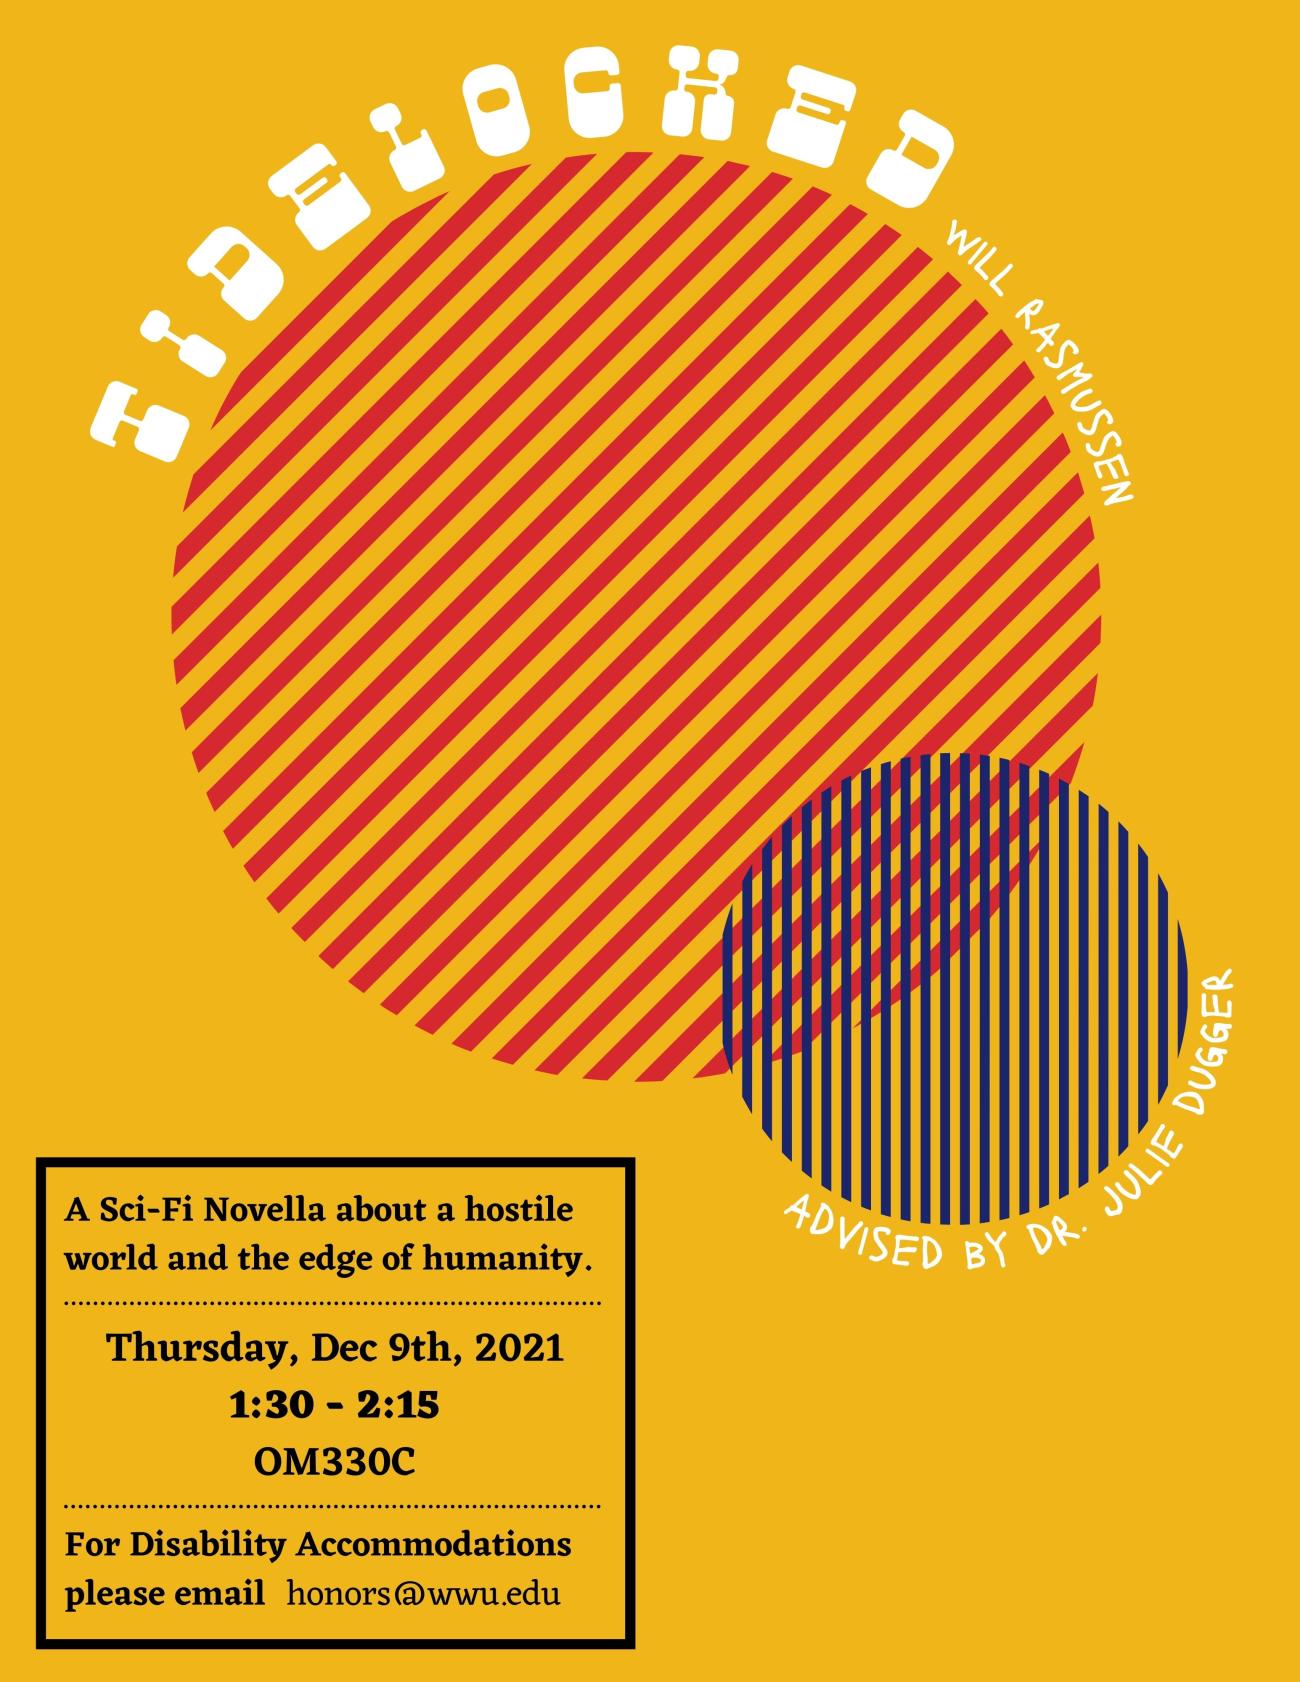 An orange poster with two striped circles. The text reads: "Tidelocked by Will Rasmussen, Advised by Dr. Julie Dugger. A Sci-Fi Novella about a hostile world and the edge of humanity. Thursday, December 9th, 2021. at 1:30-2:15 in OM330C. For disability accommodations please email honors@wwu.edu"